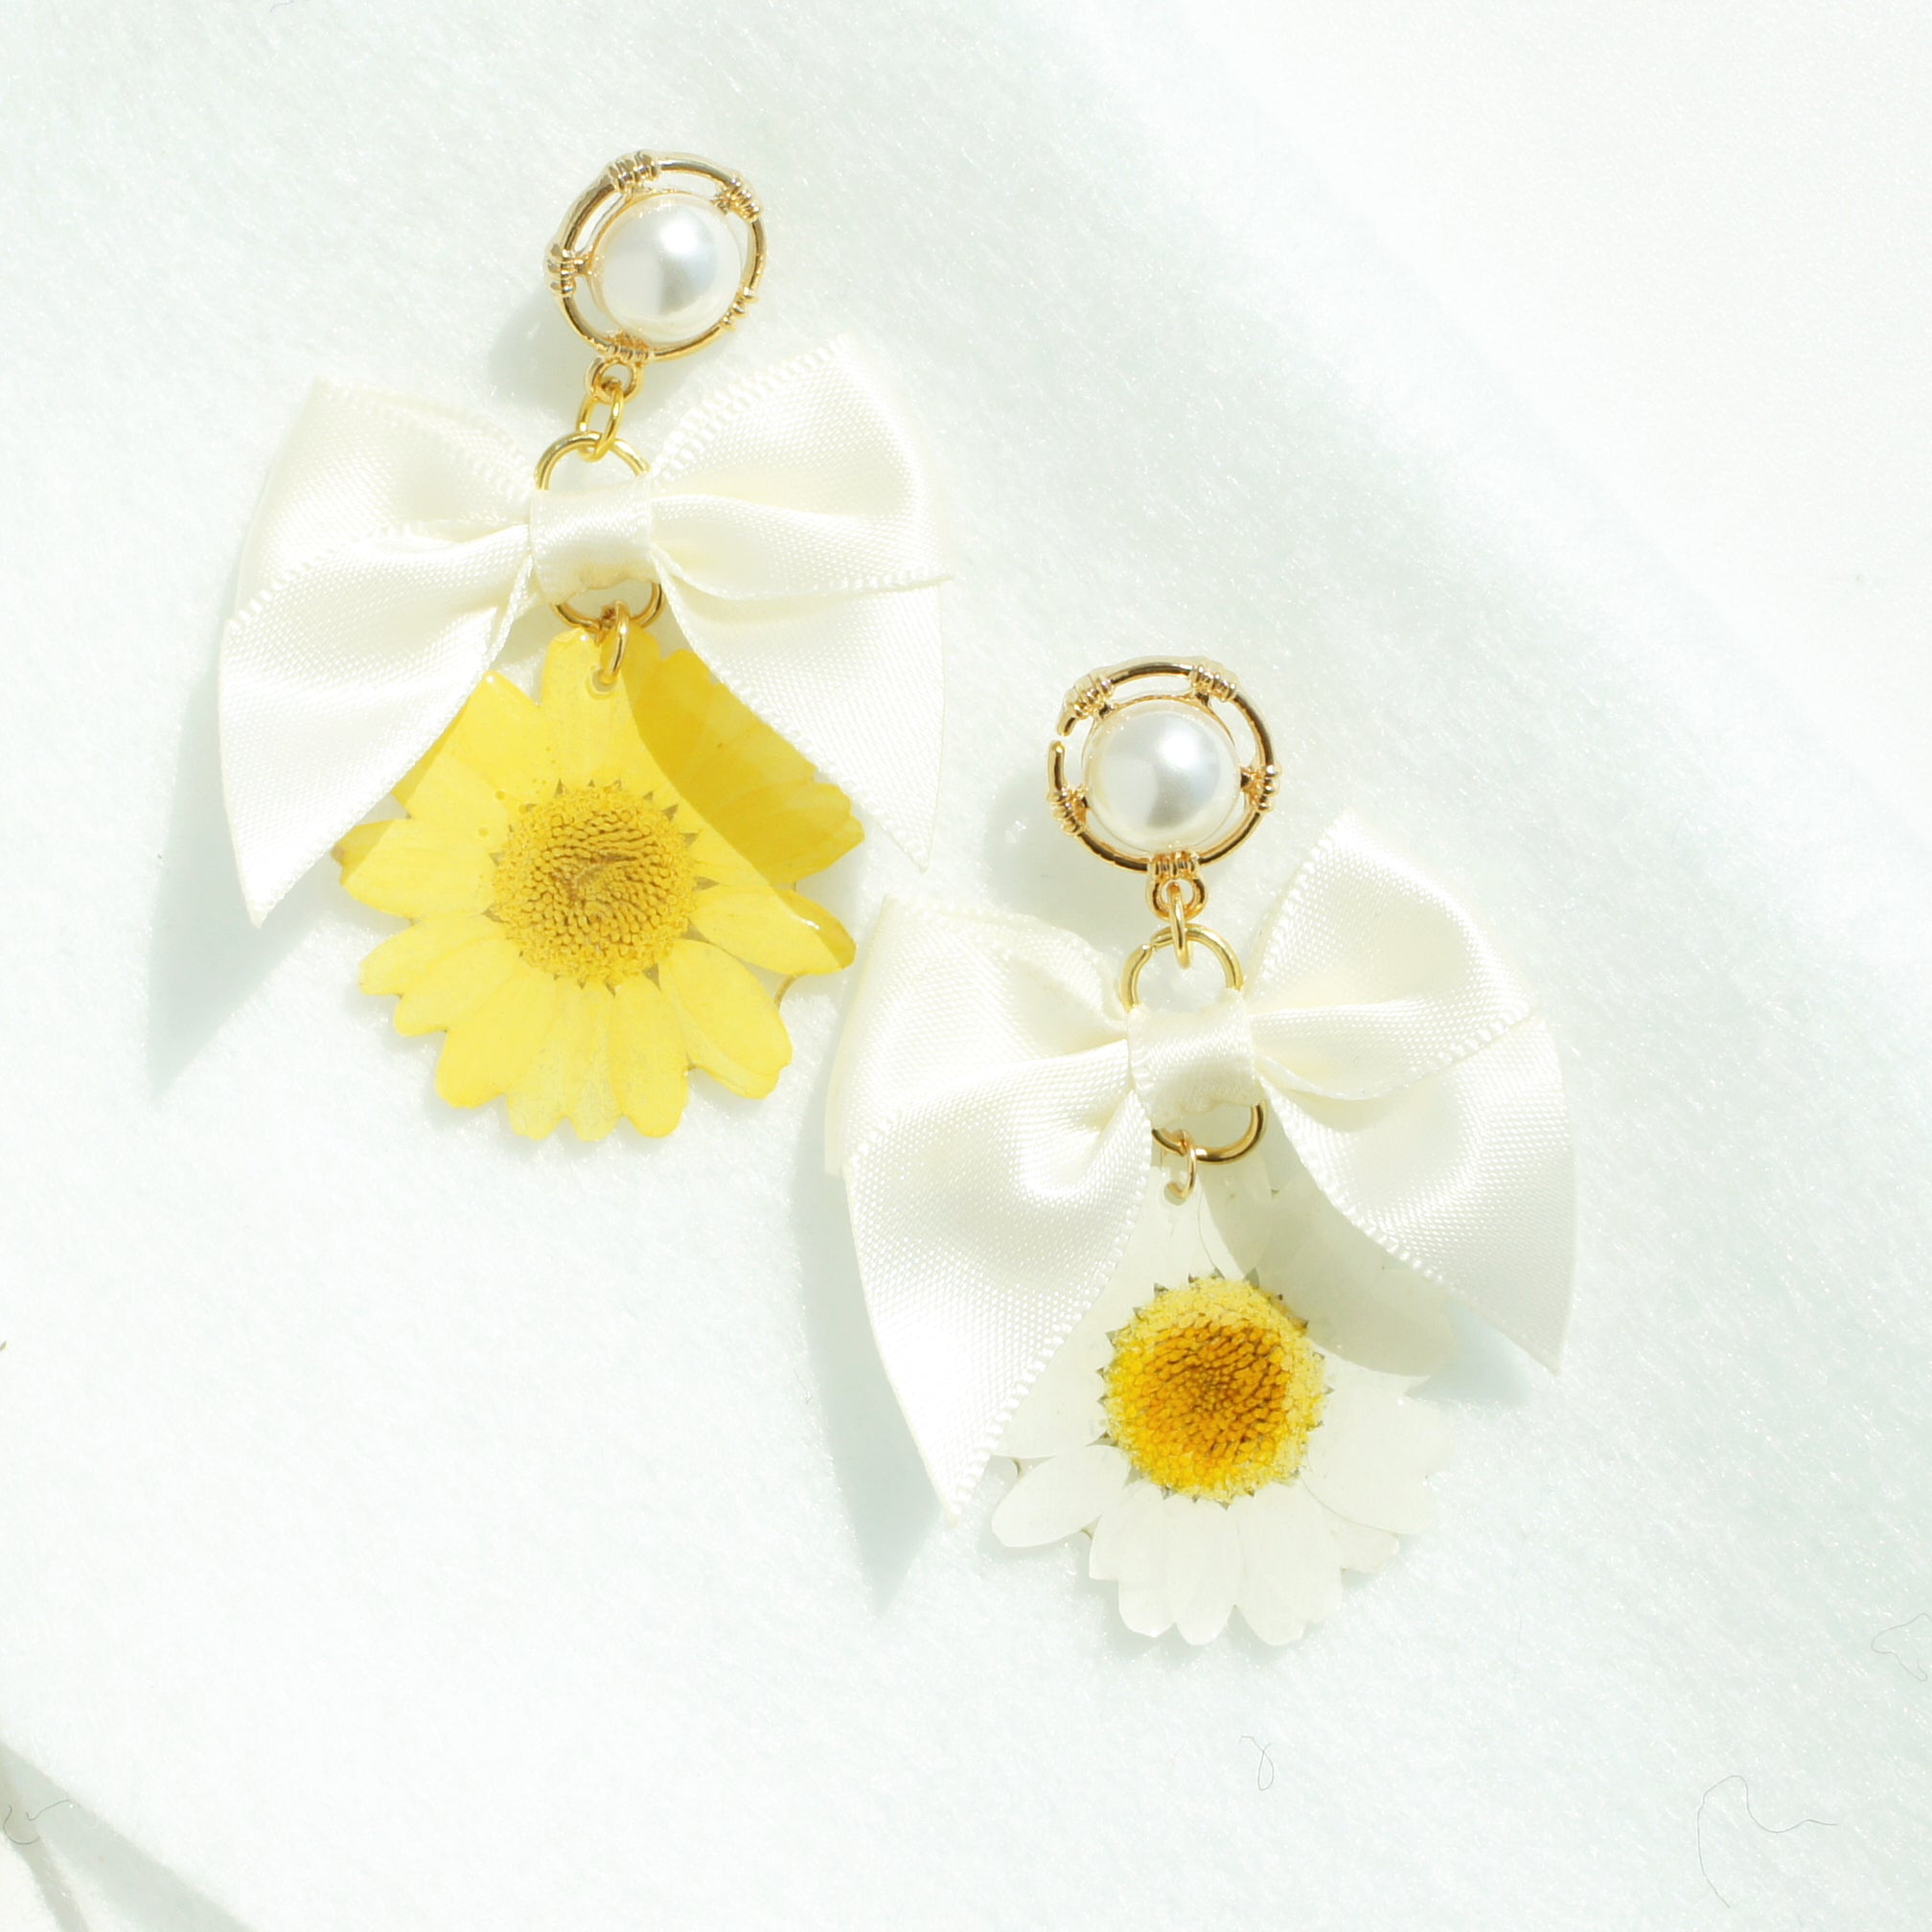 *REAL FLOWER* Daisy and Ribbon Bow Drop Earrings with Pearl Studs